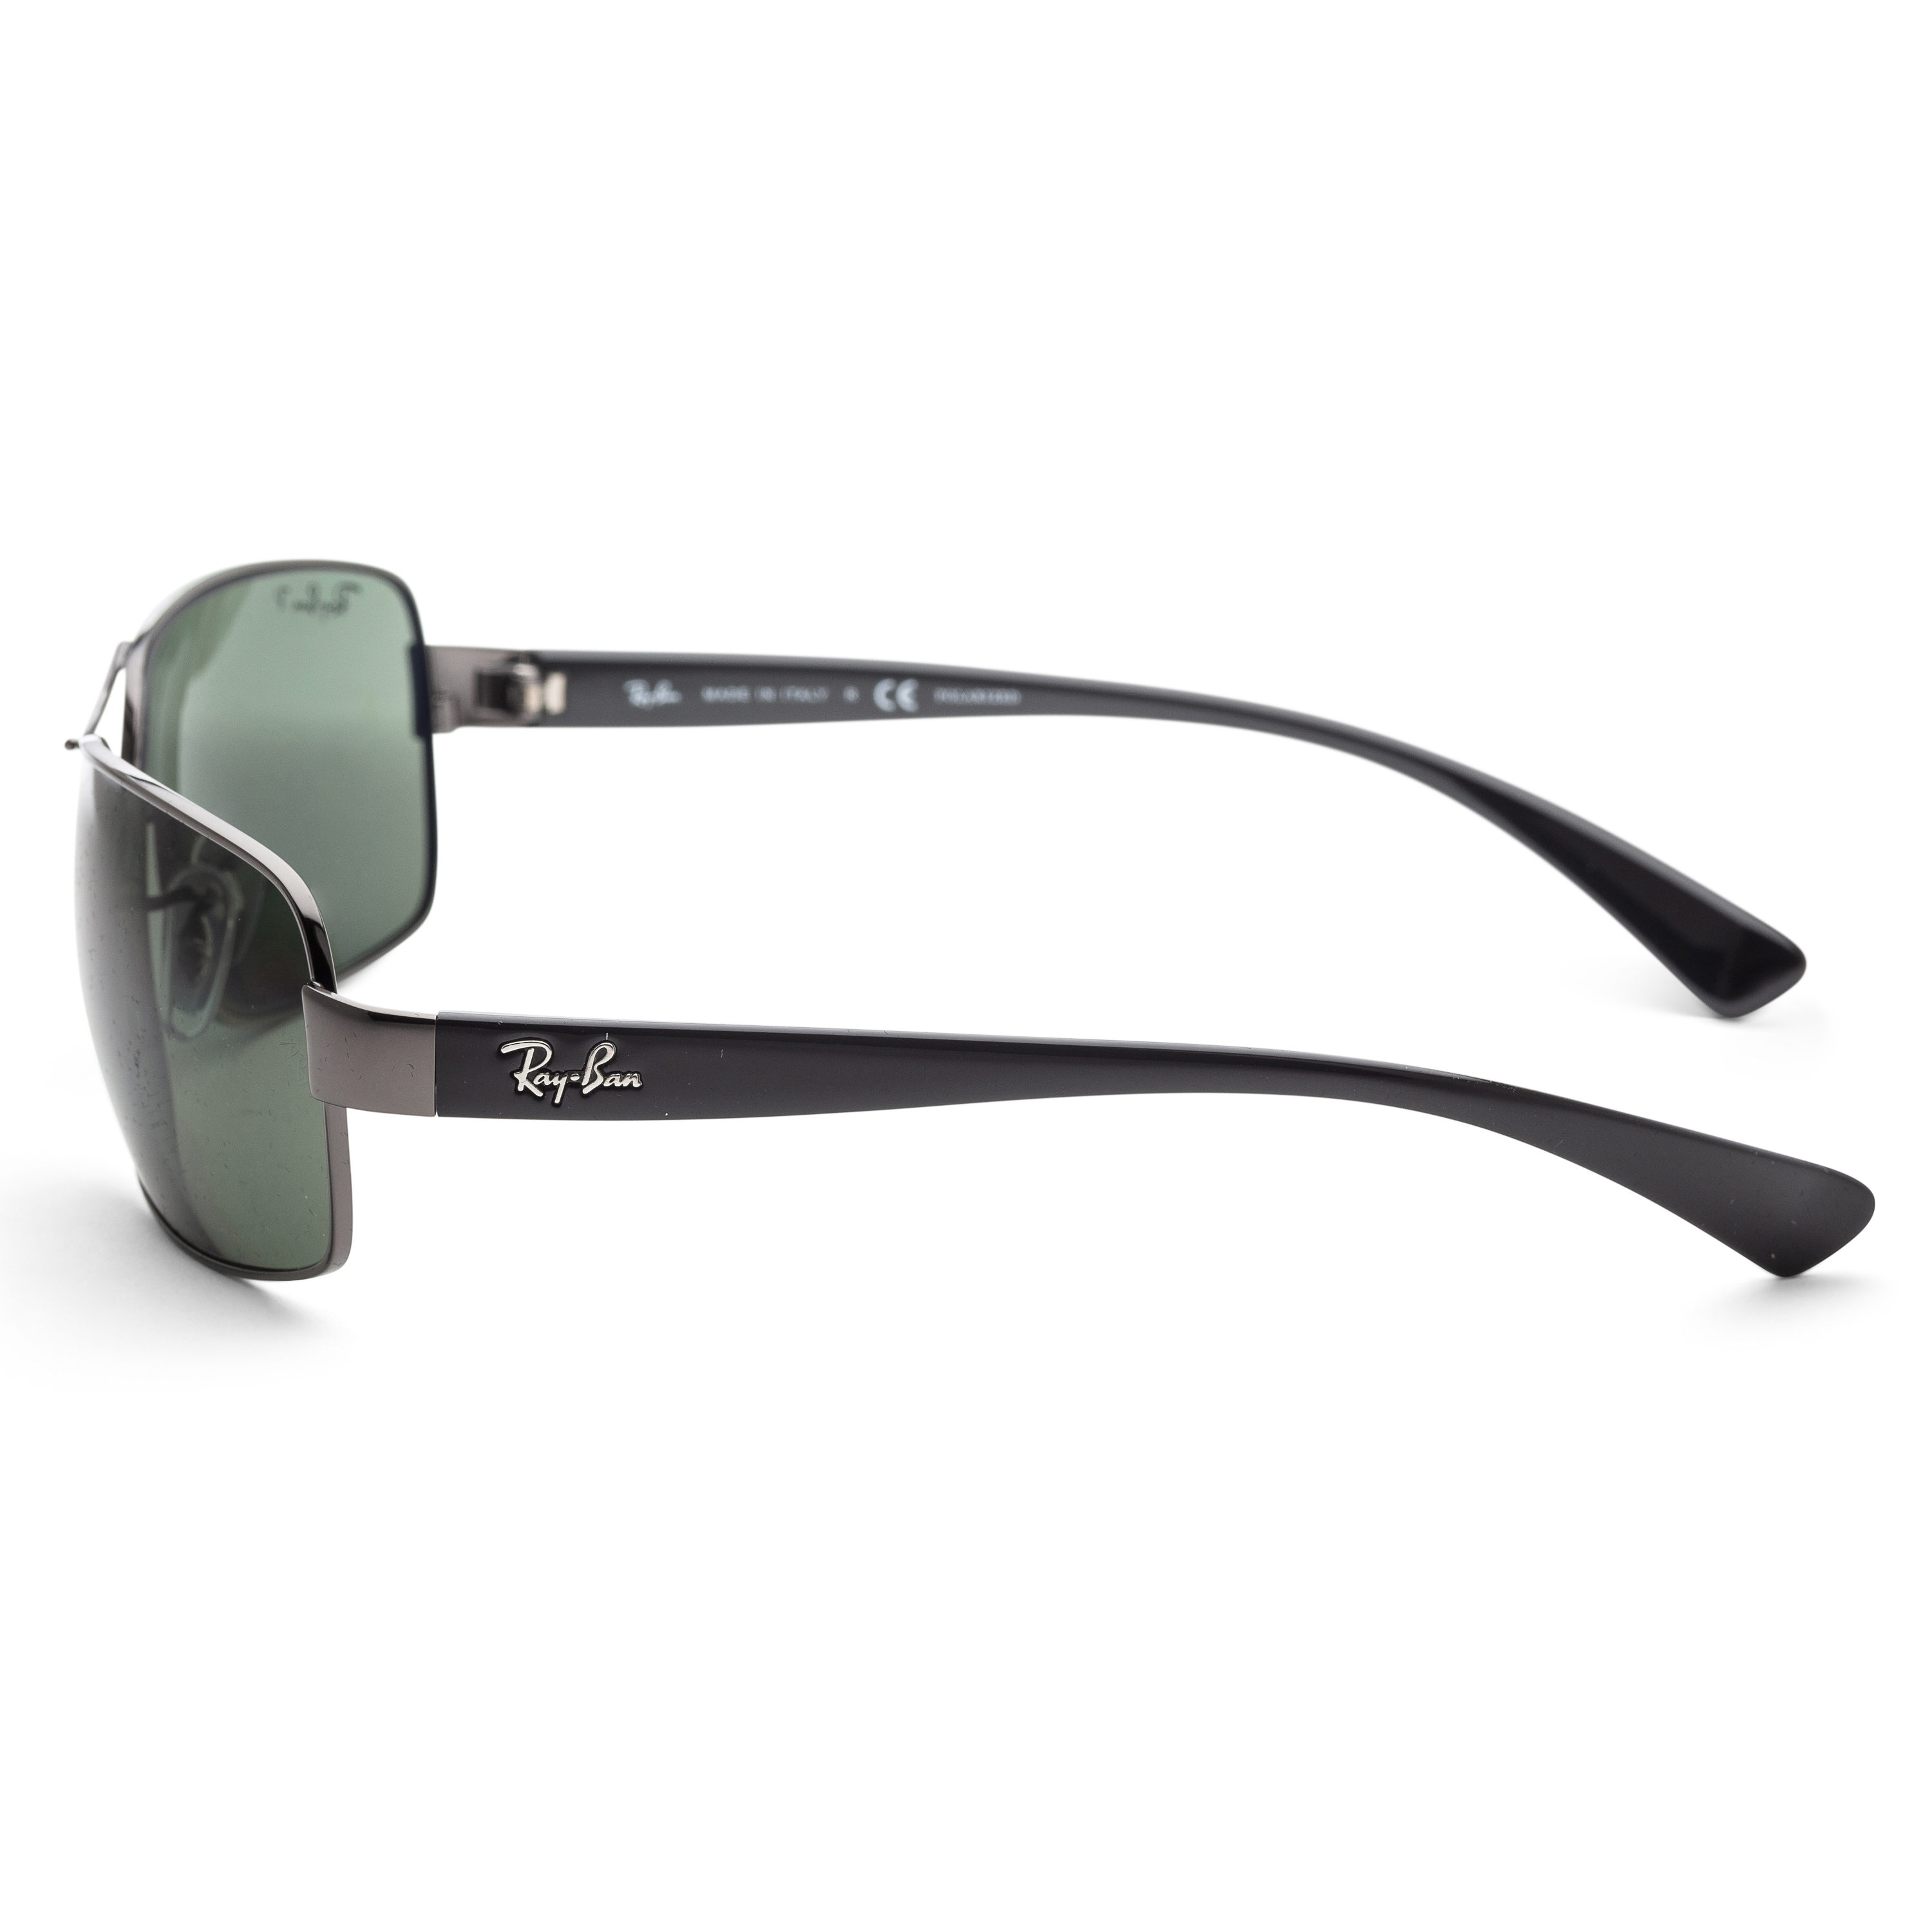 Ray-Ban Men's Polarized RB3379-004/58-64 Silver Rectangle Sunglasses - image 2 of 2